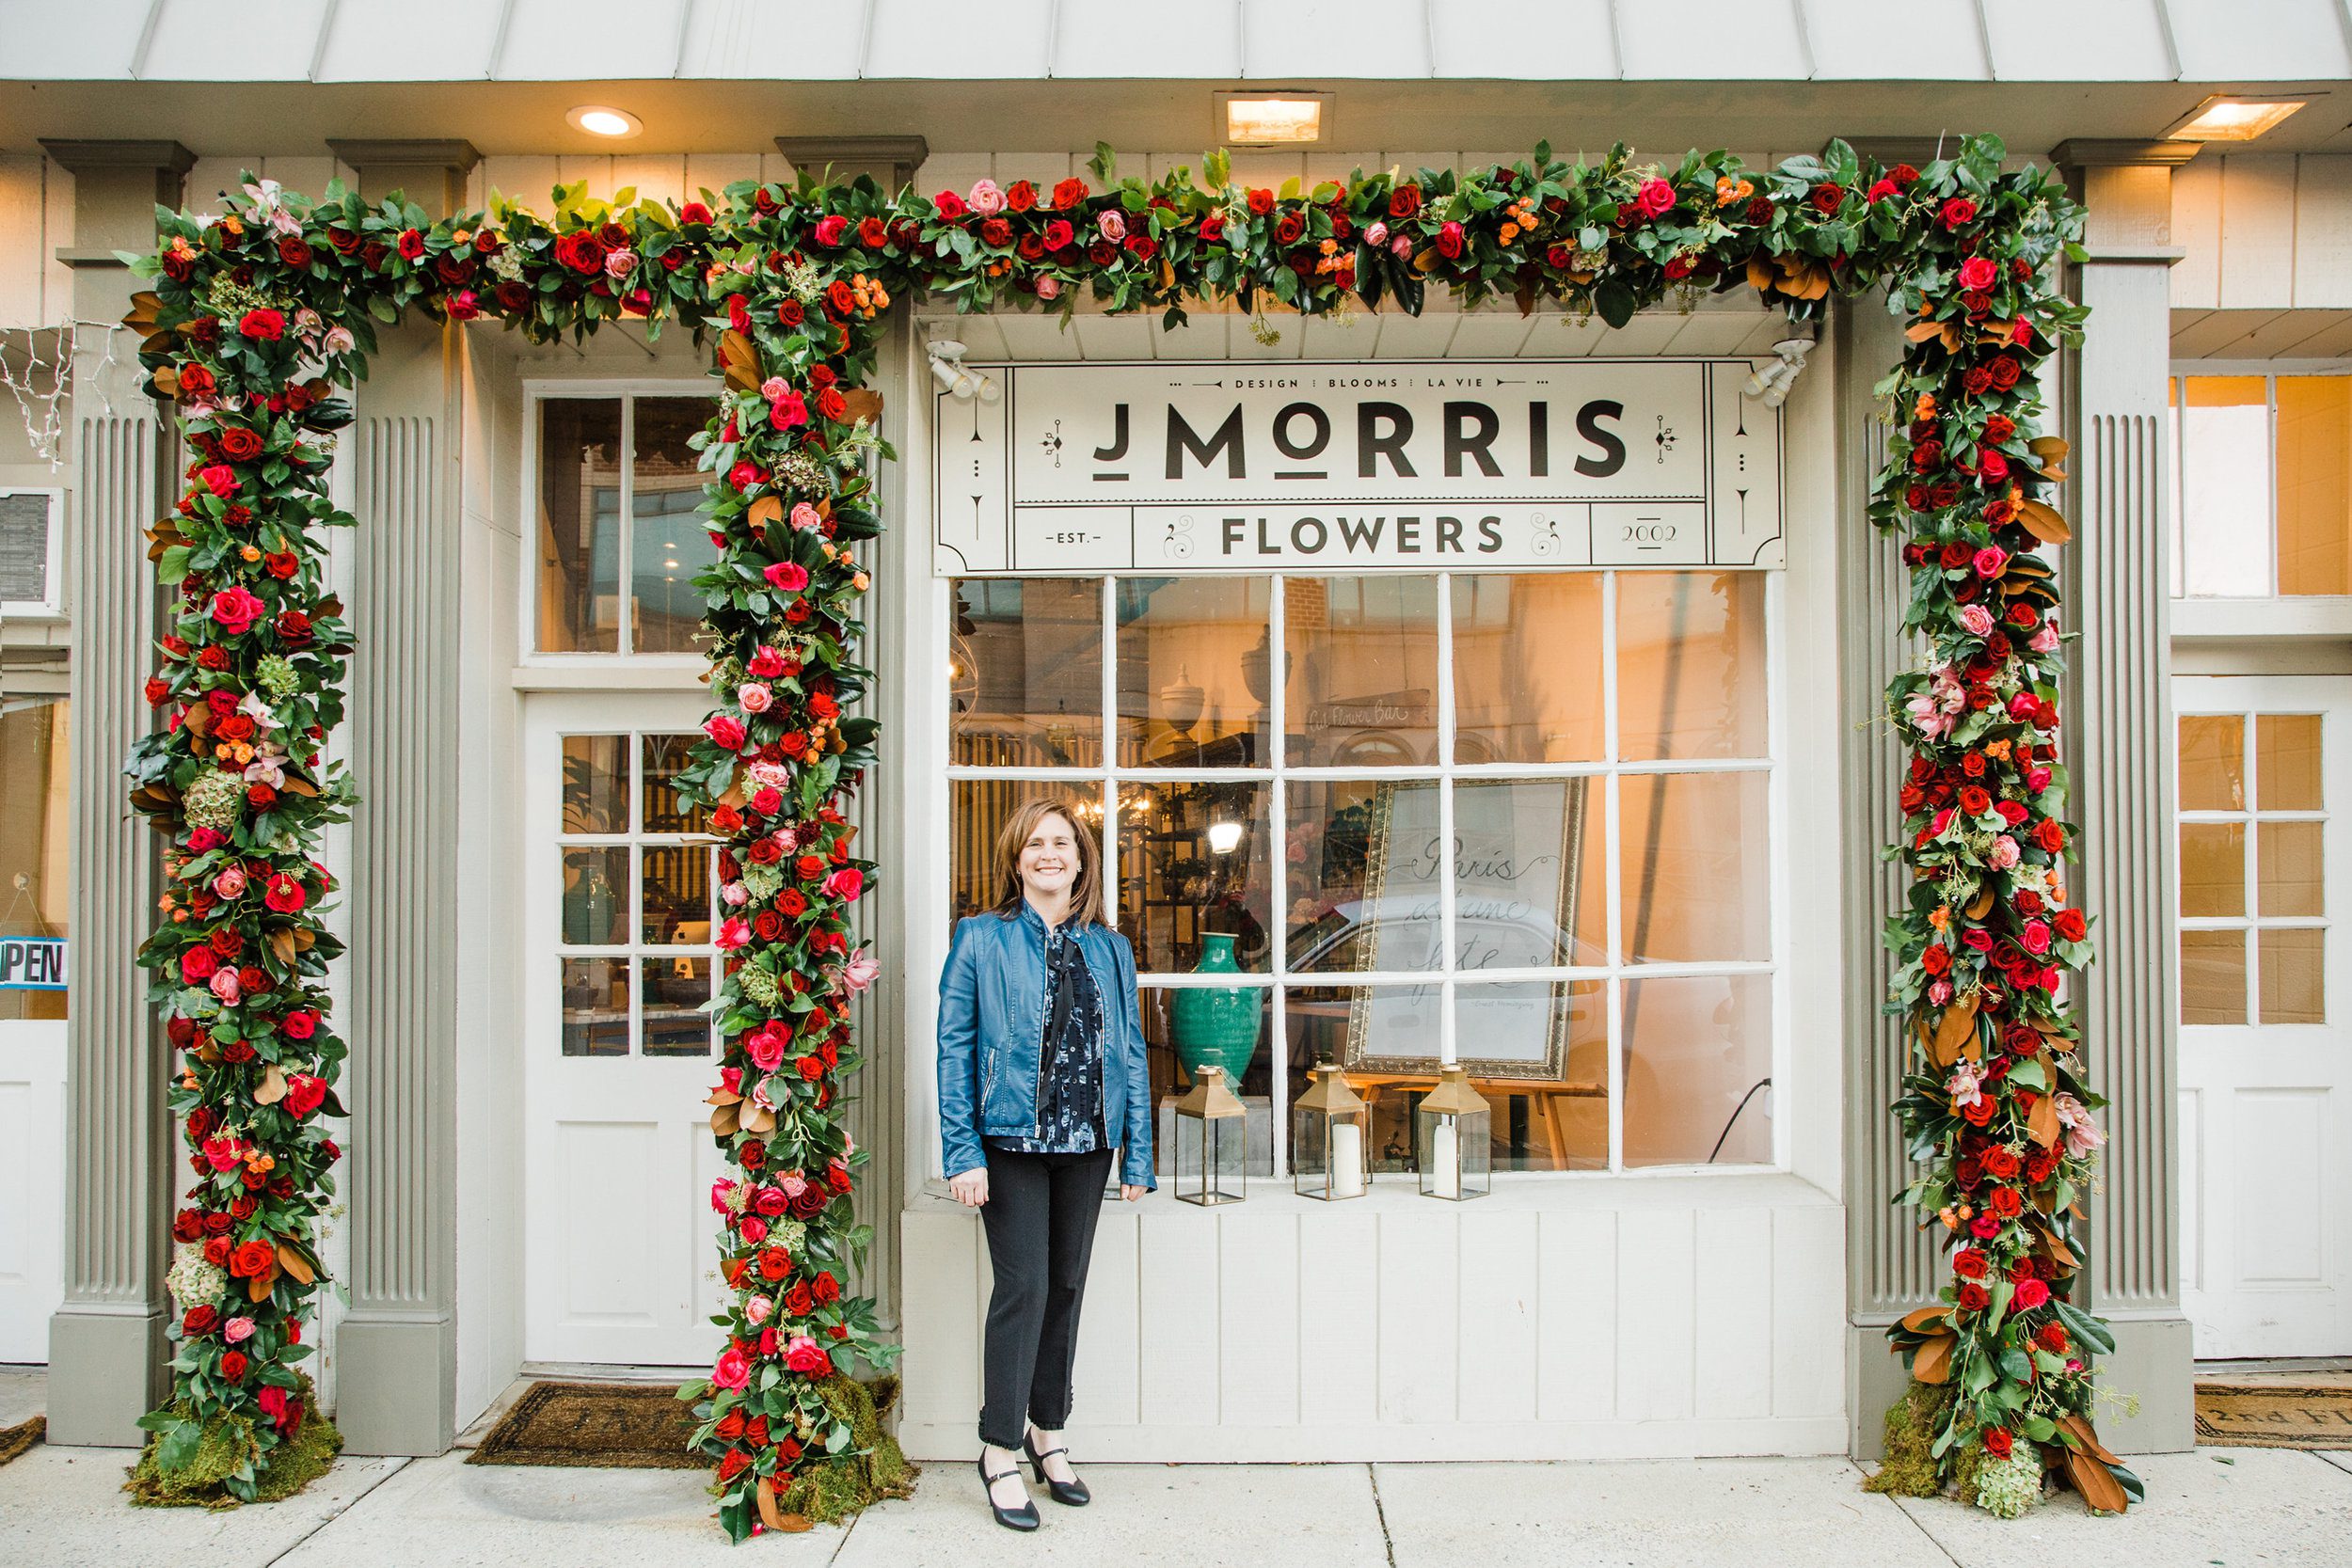 Jennifer Morris, Owner and Director of Blooms for J. Morris Flowers, 120 East Market Street. Ruby Red, Burgundy and burnt Orange strike a balance with blush pink and greens. This installation was a team effort under the direction of Jennifer, inspir…